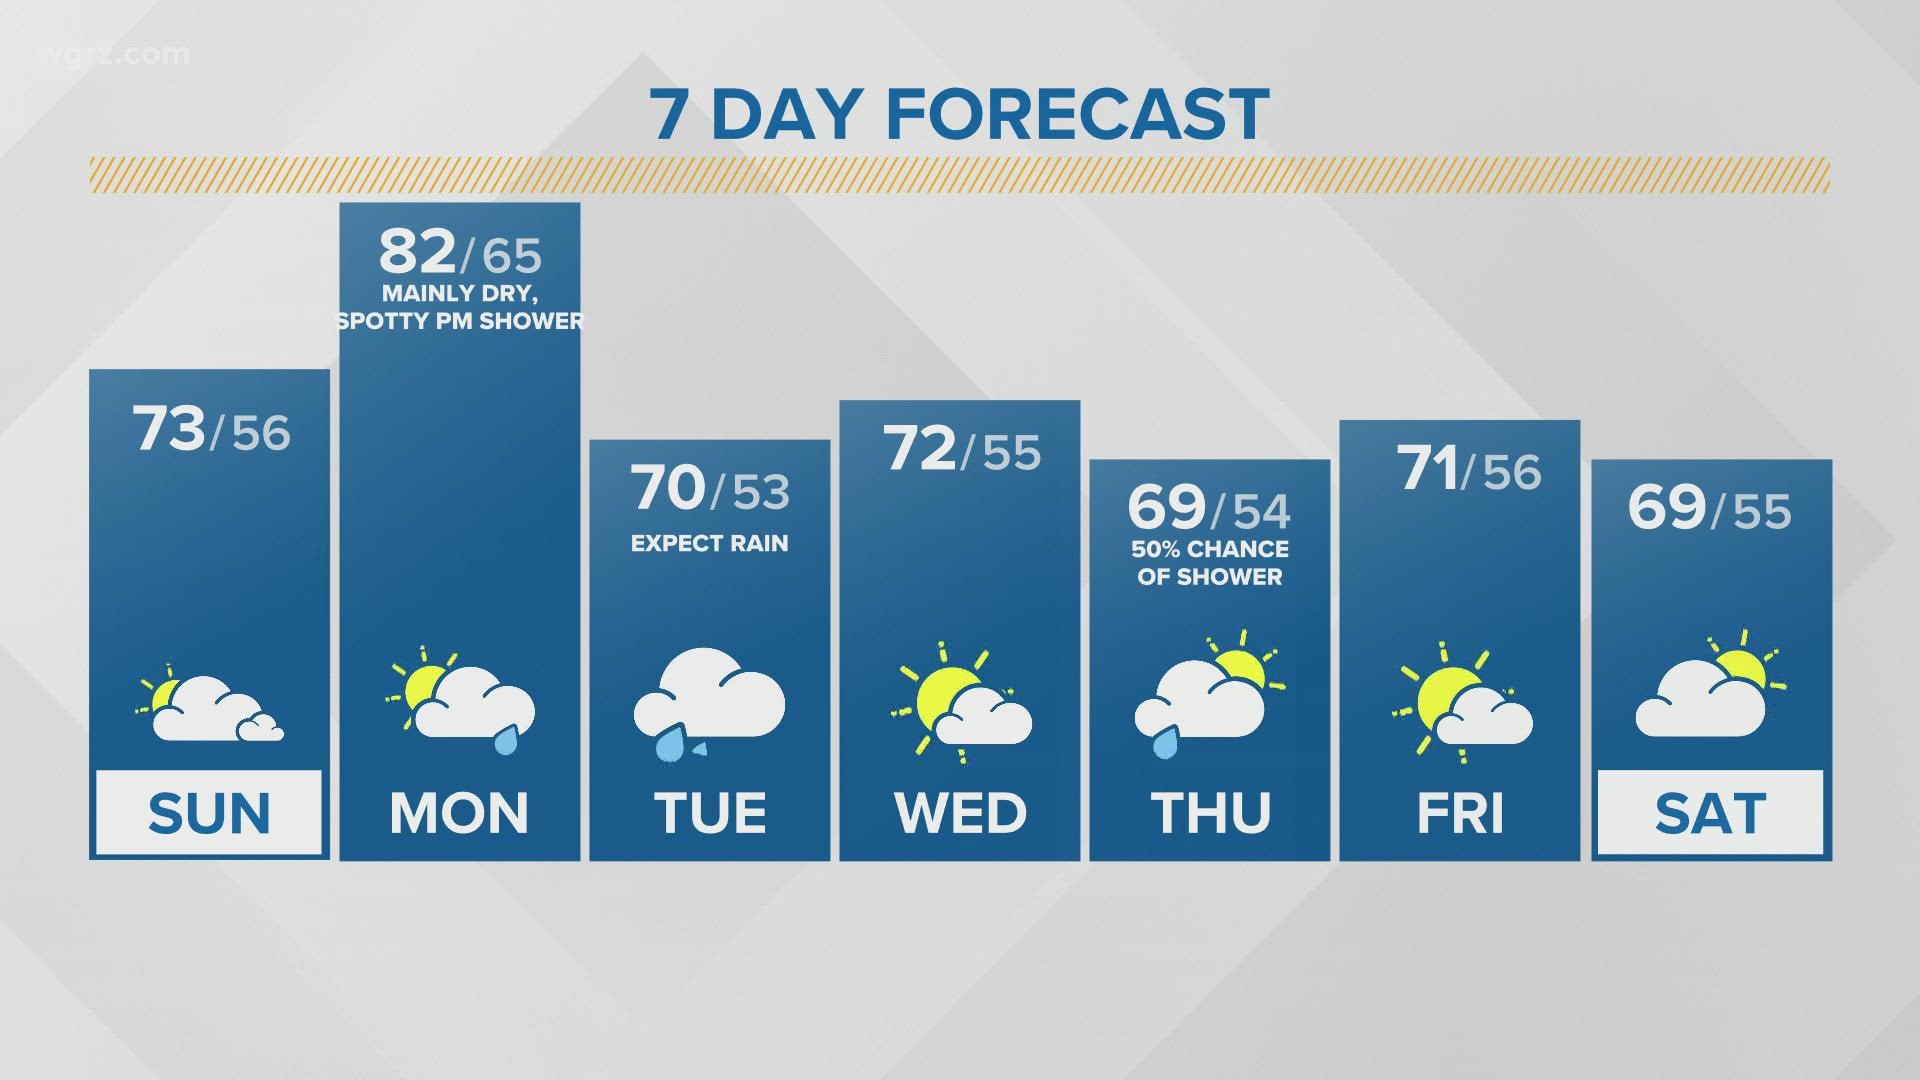 Storm Team 2 has your Sunday and 7-day forecast.